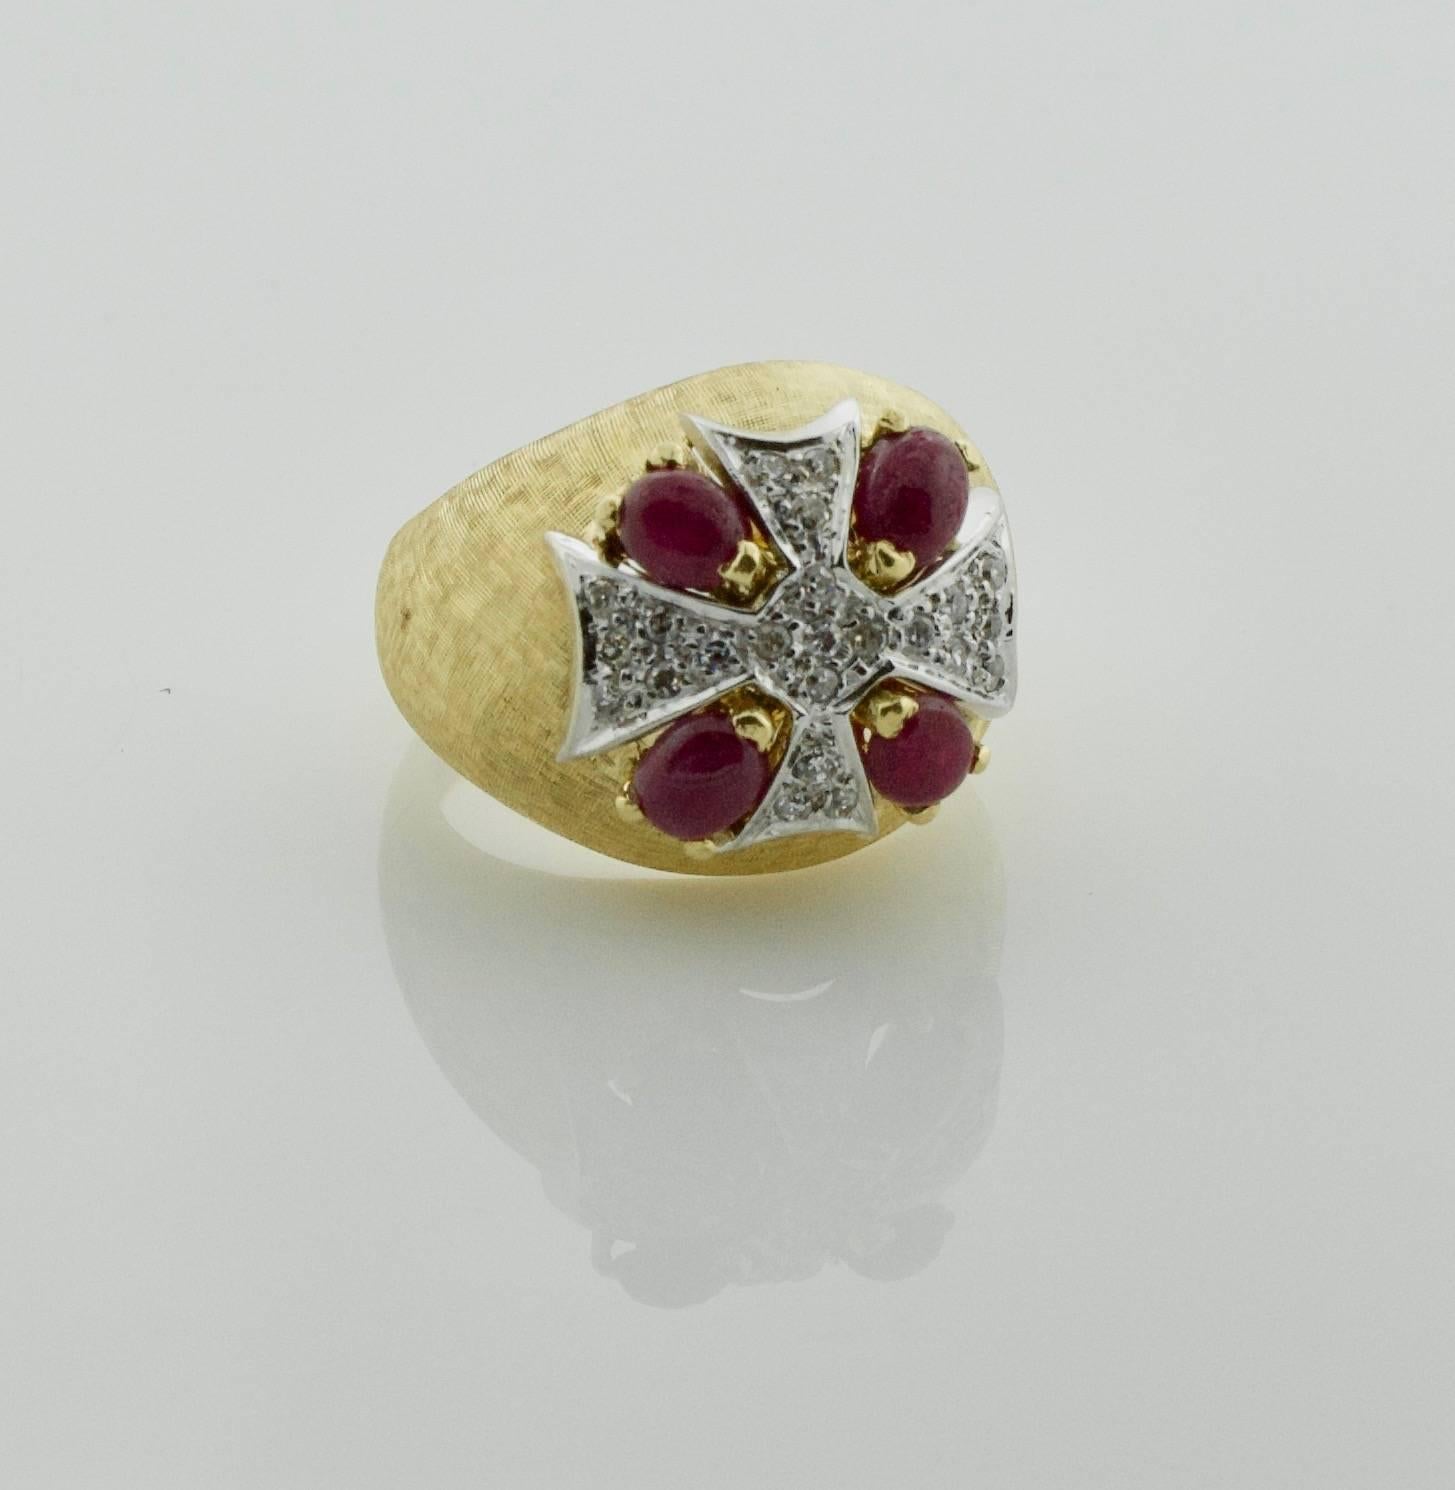 1950's Maltese Cross Diamond and Ruby Ring in 18k
Four Cabochon Pear Shaped Rubies  weighing 1.40 carats approximately
Twenty Three Round Diamonds weighing .45 carats approximately
size 6 3/4
The Maltese cross is a starlike symbol formed by four